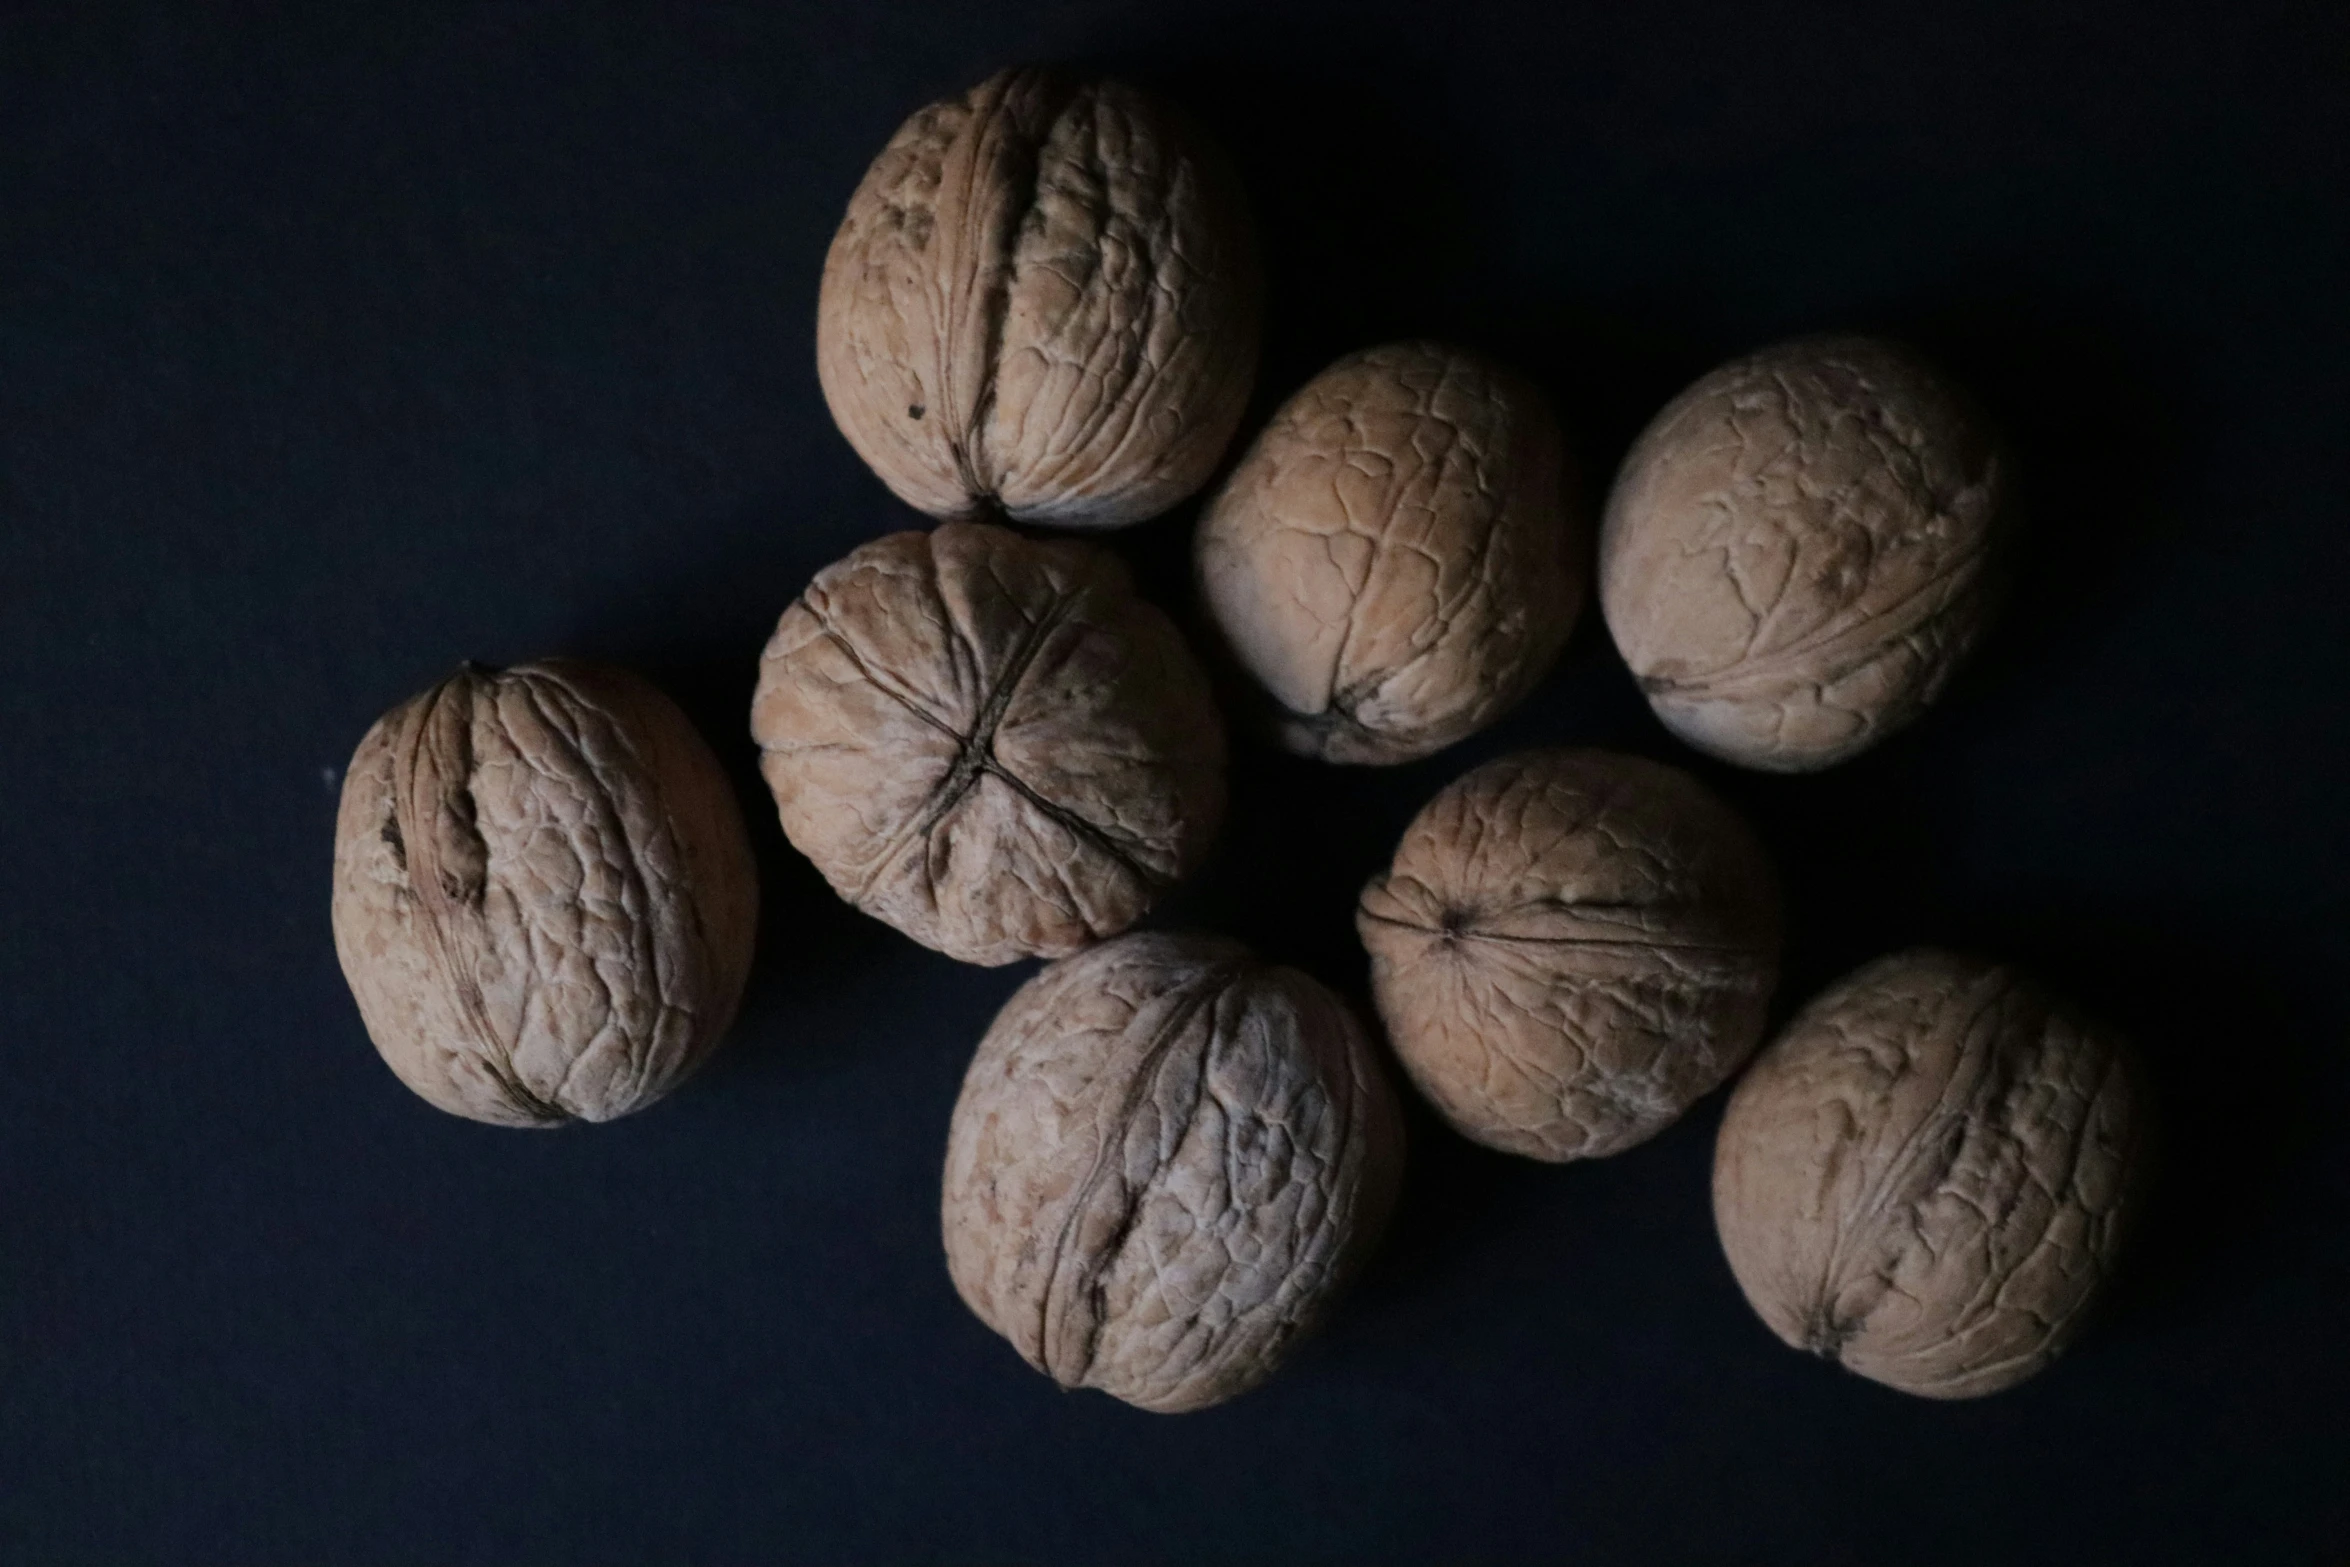 walnuts are arranged in four rows on a dark background